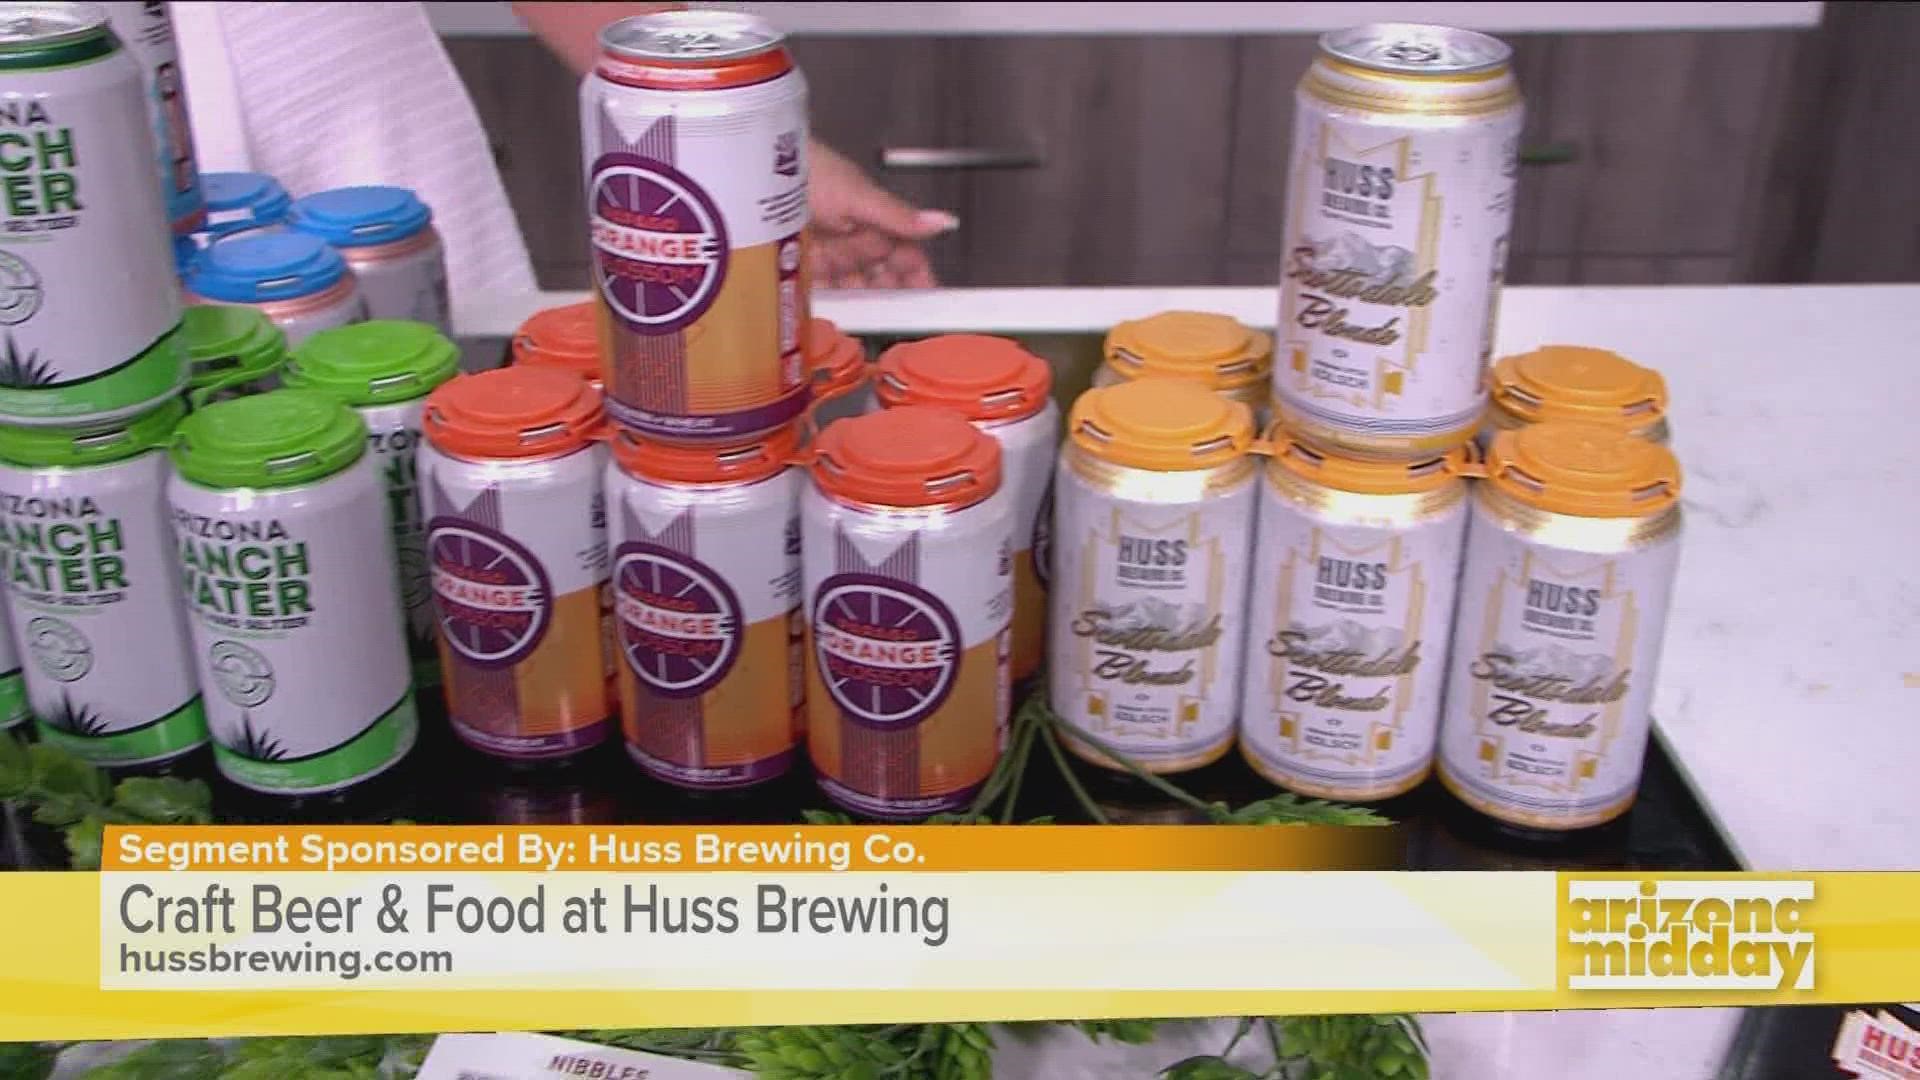 Chip Mulalala, the Minister of Craft Beer for Huss Brewing gives us their lowdown on their IPA special and their delicious bites.